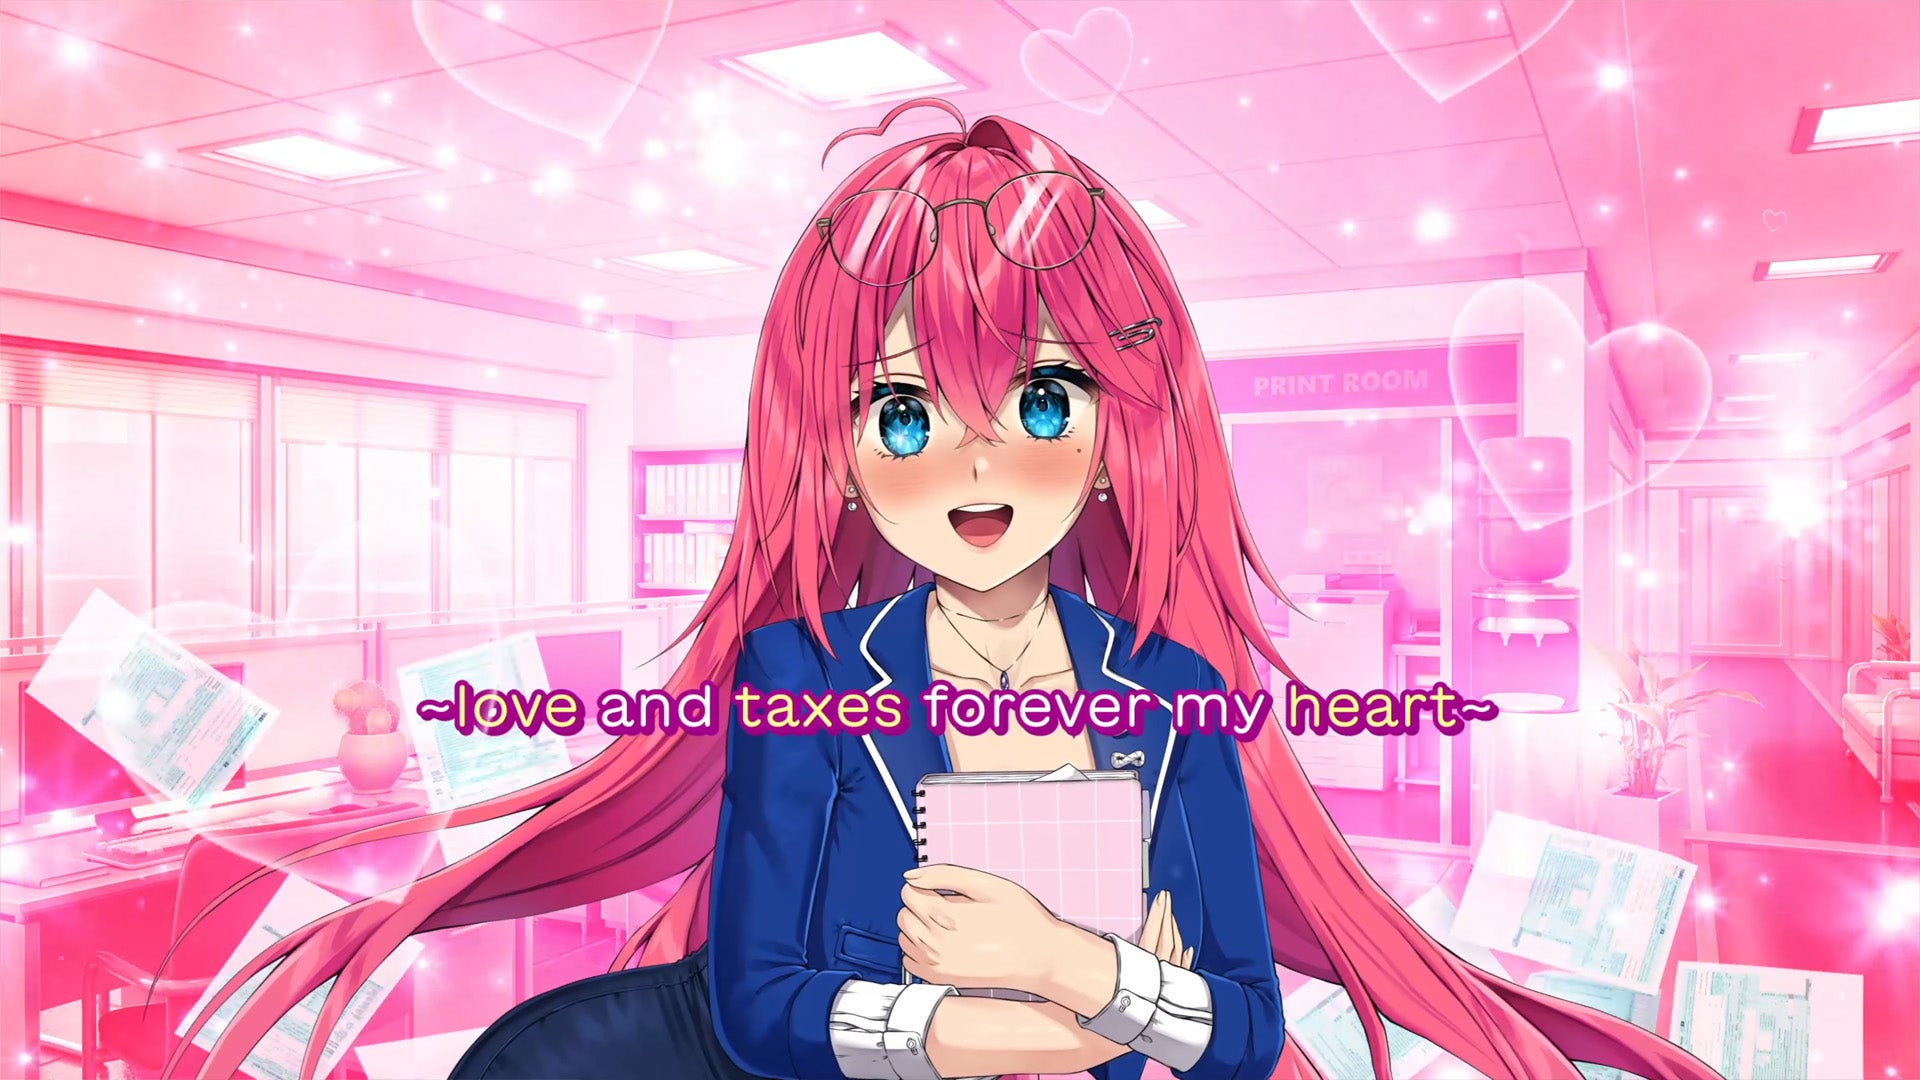 Image for Dating sim that helps you file your taxes delisted from Steam for obvious reasons